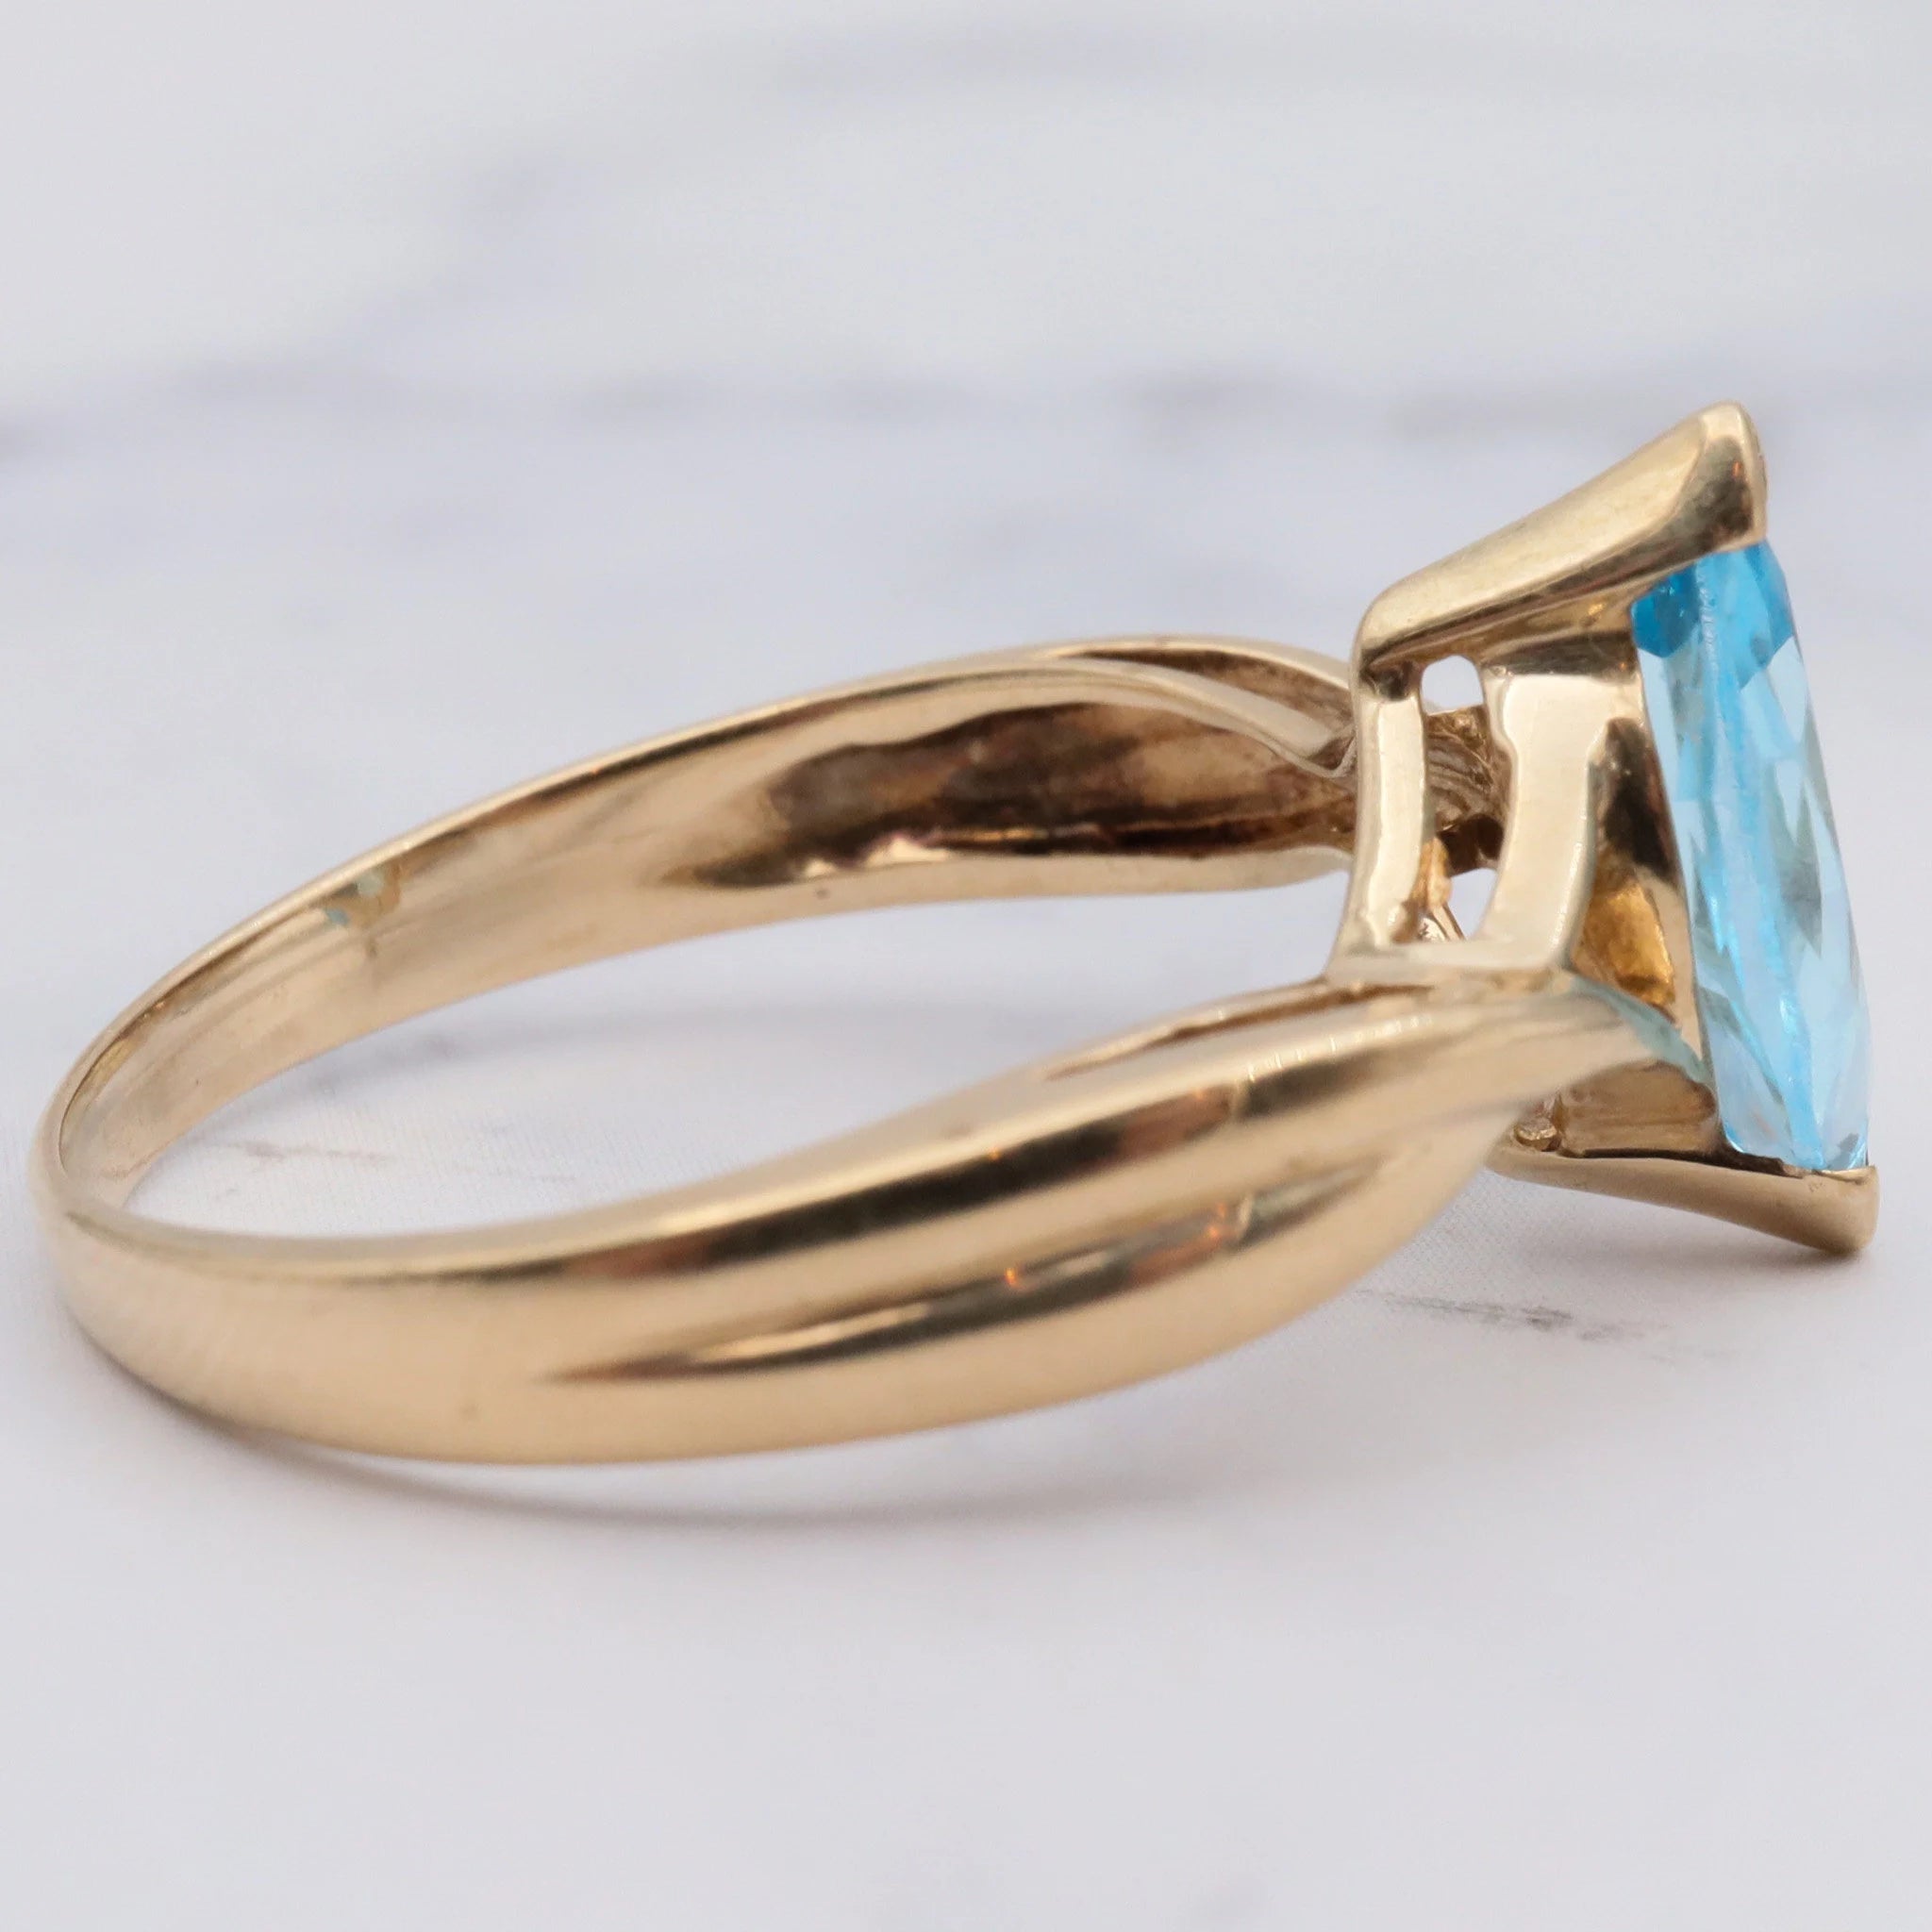 Retro 10k gold and marquise cut blue topaz ring, size 7